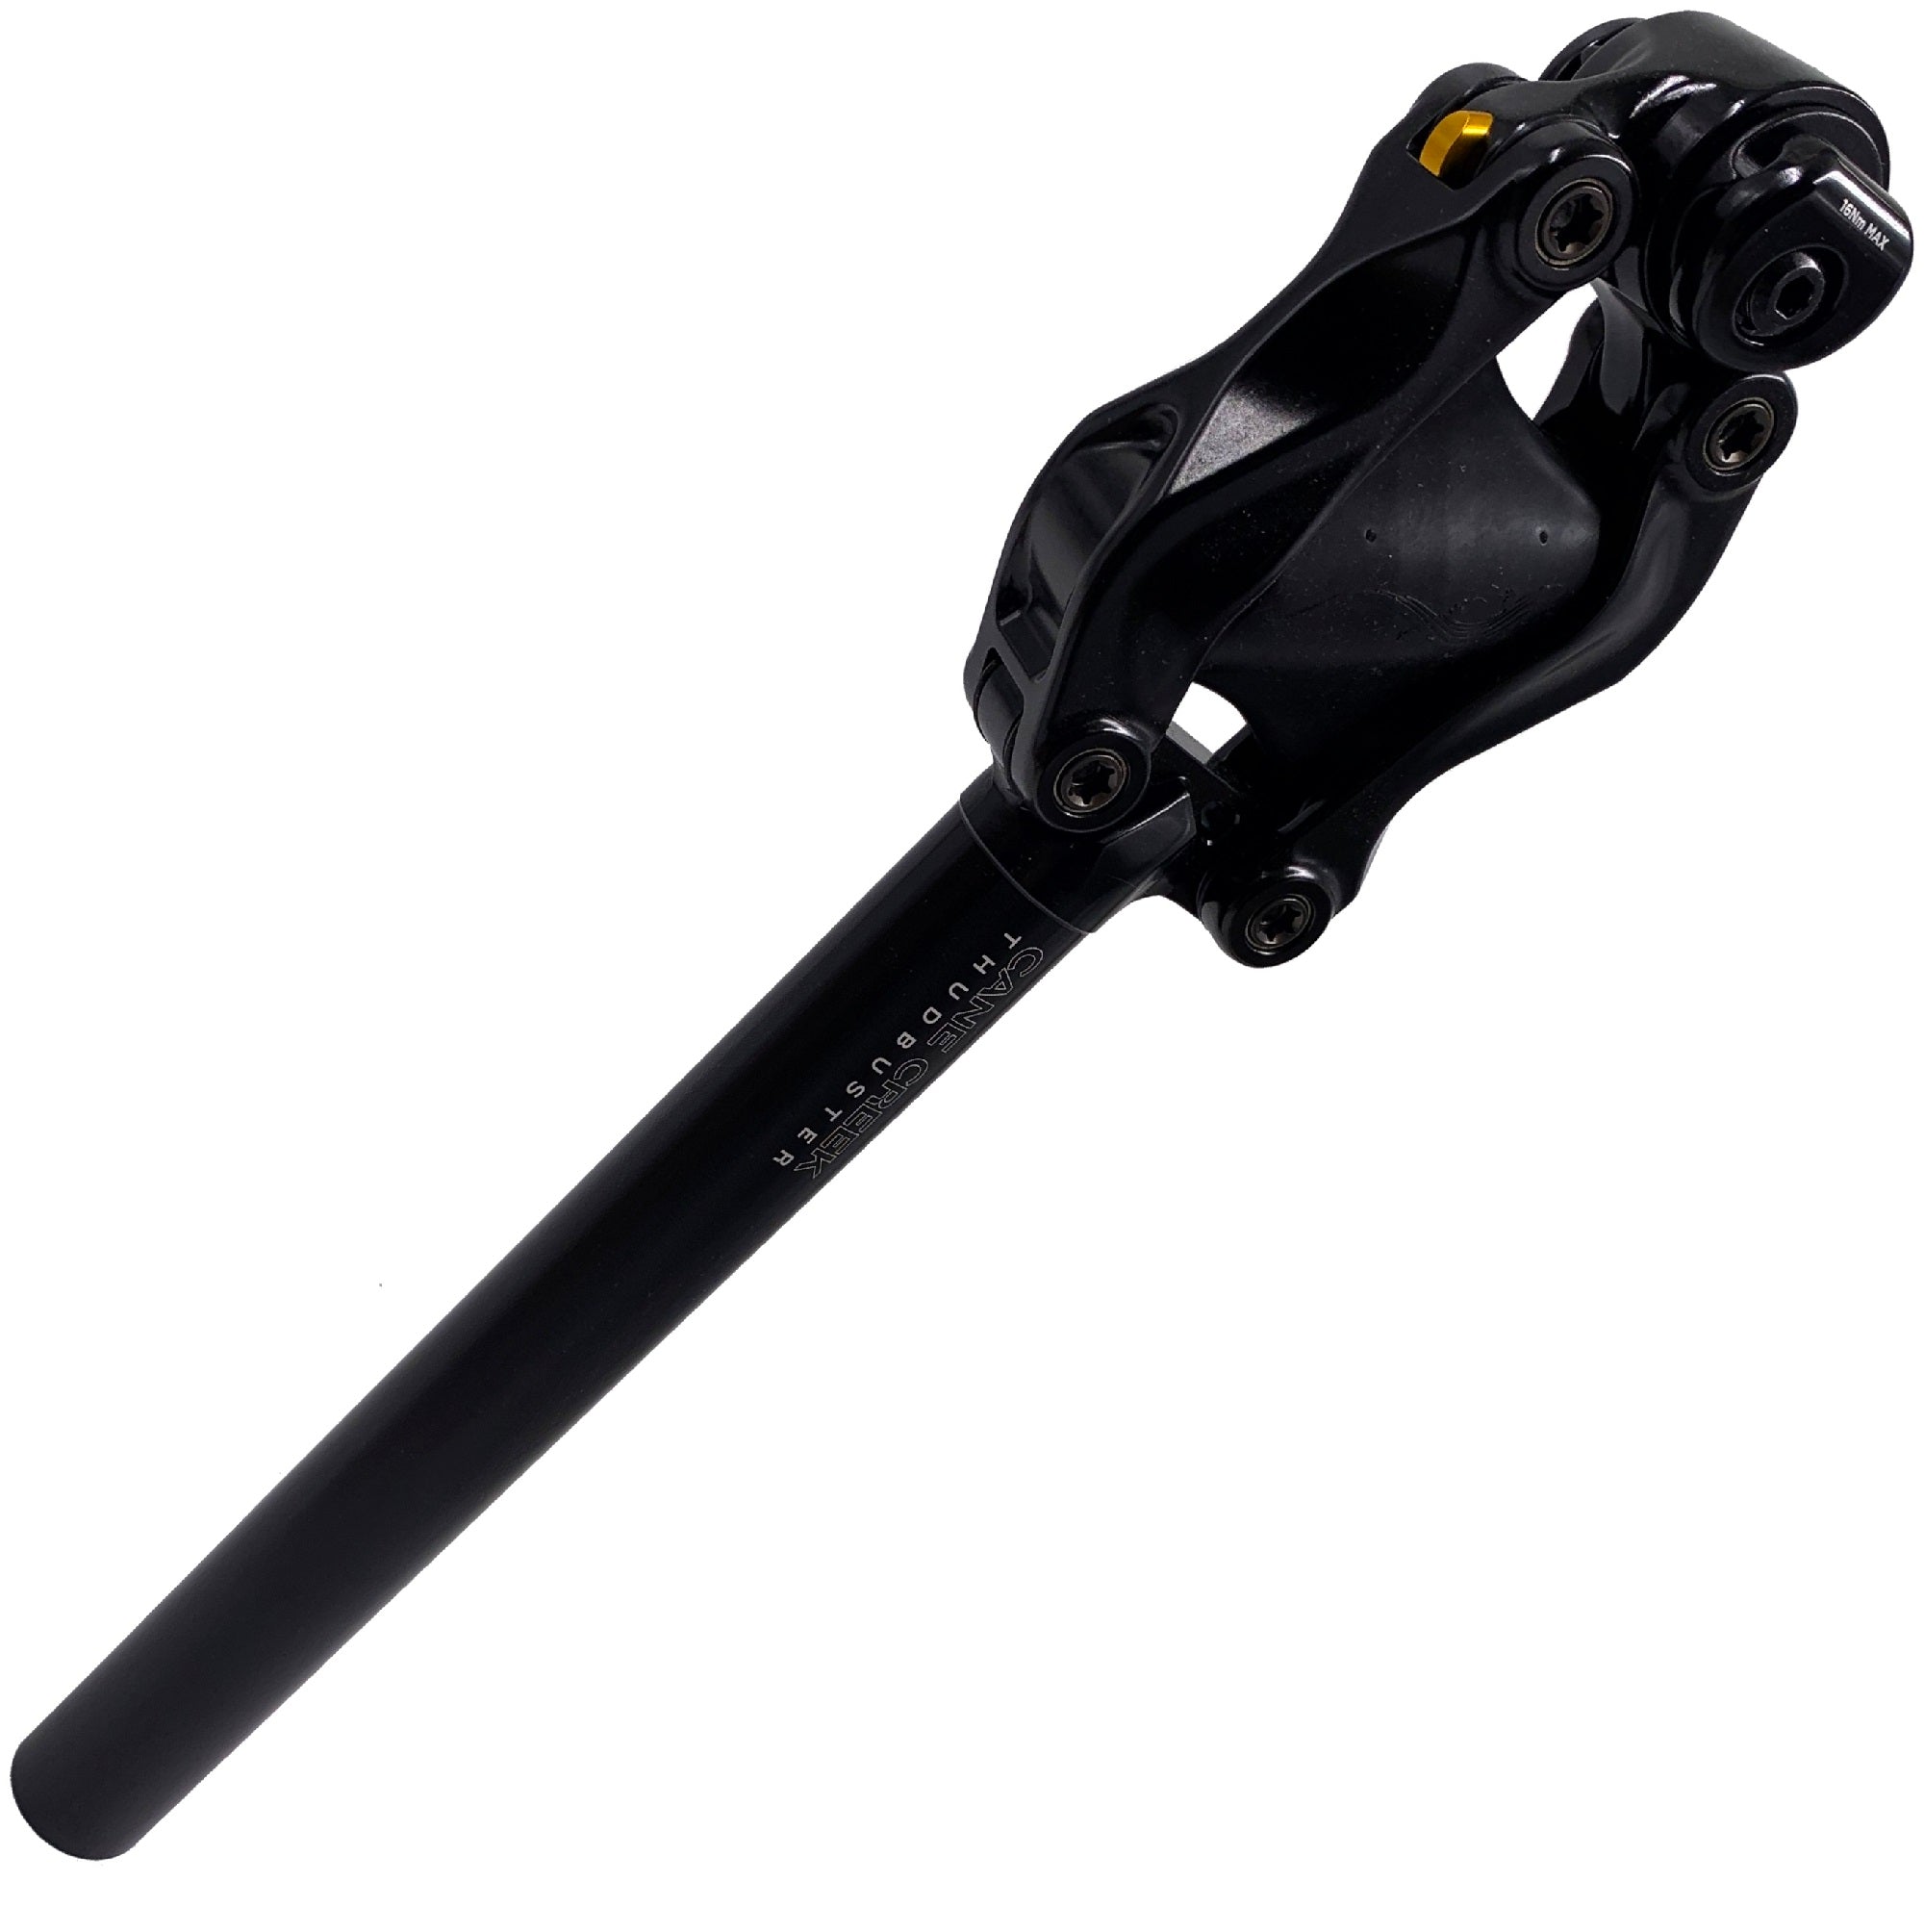 Cane Creek G4 LT Thudbuster Suspension Seatpost Long Travel - The Bikesmiths